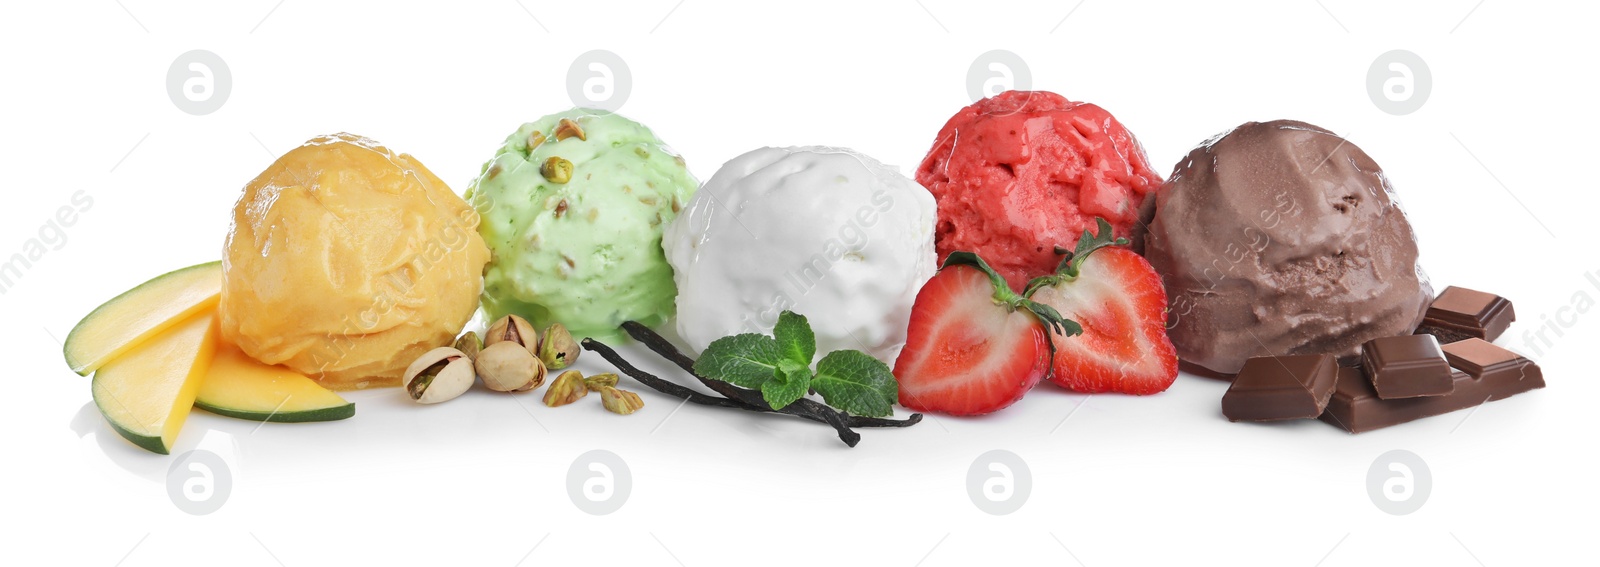 Photo of Scoops of different ice creams and ingredients on white background